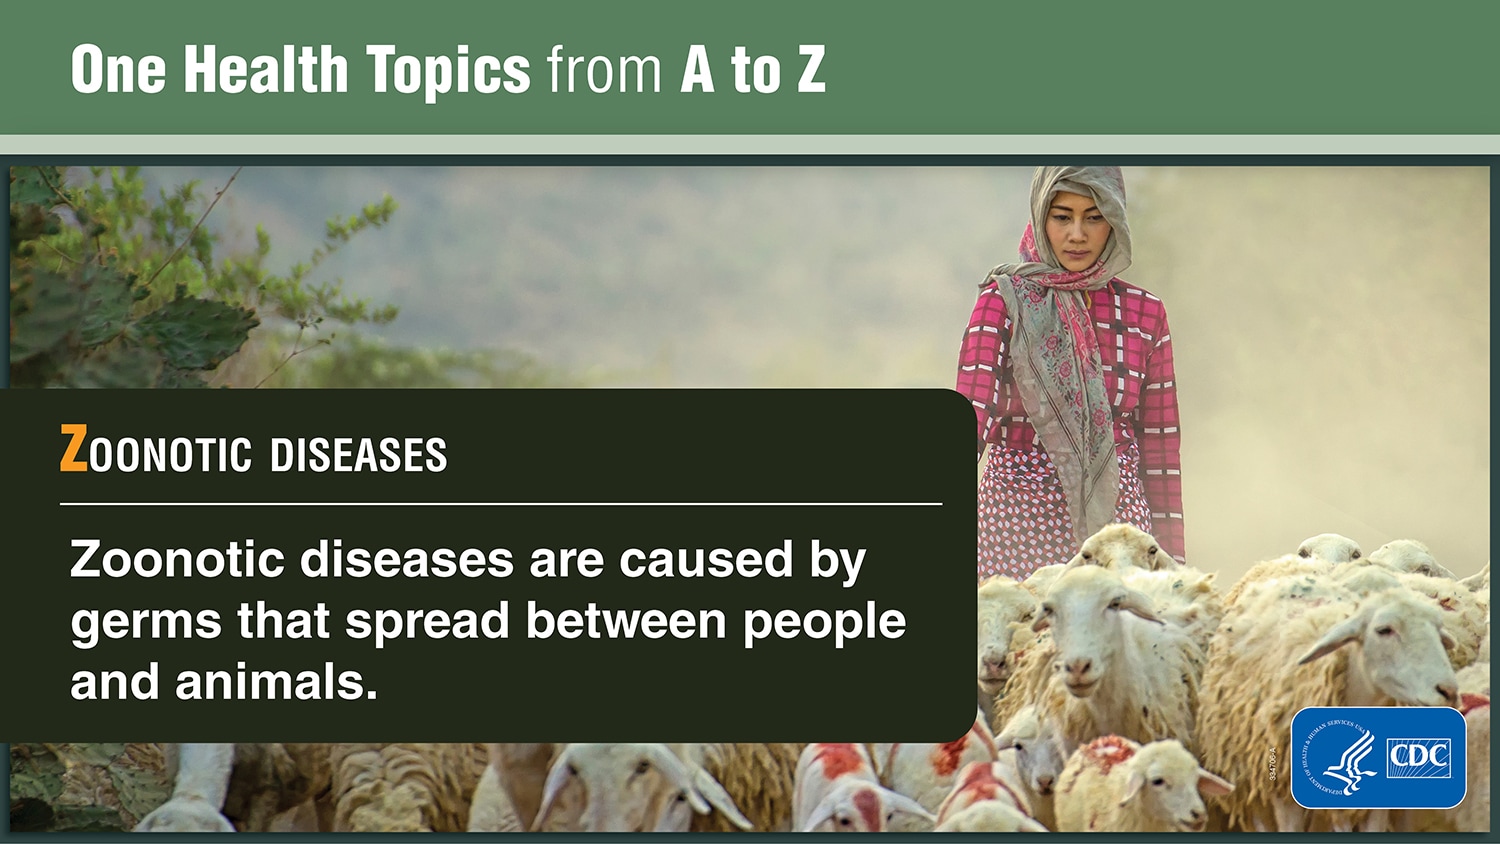 One Health Topics from A to Z explaining Zoonotic Diseases